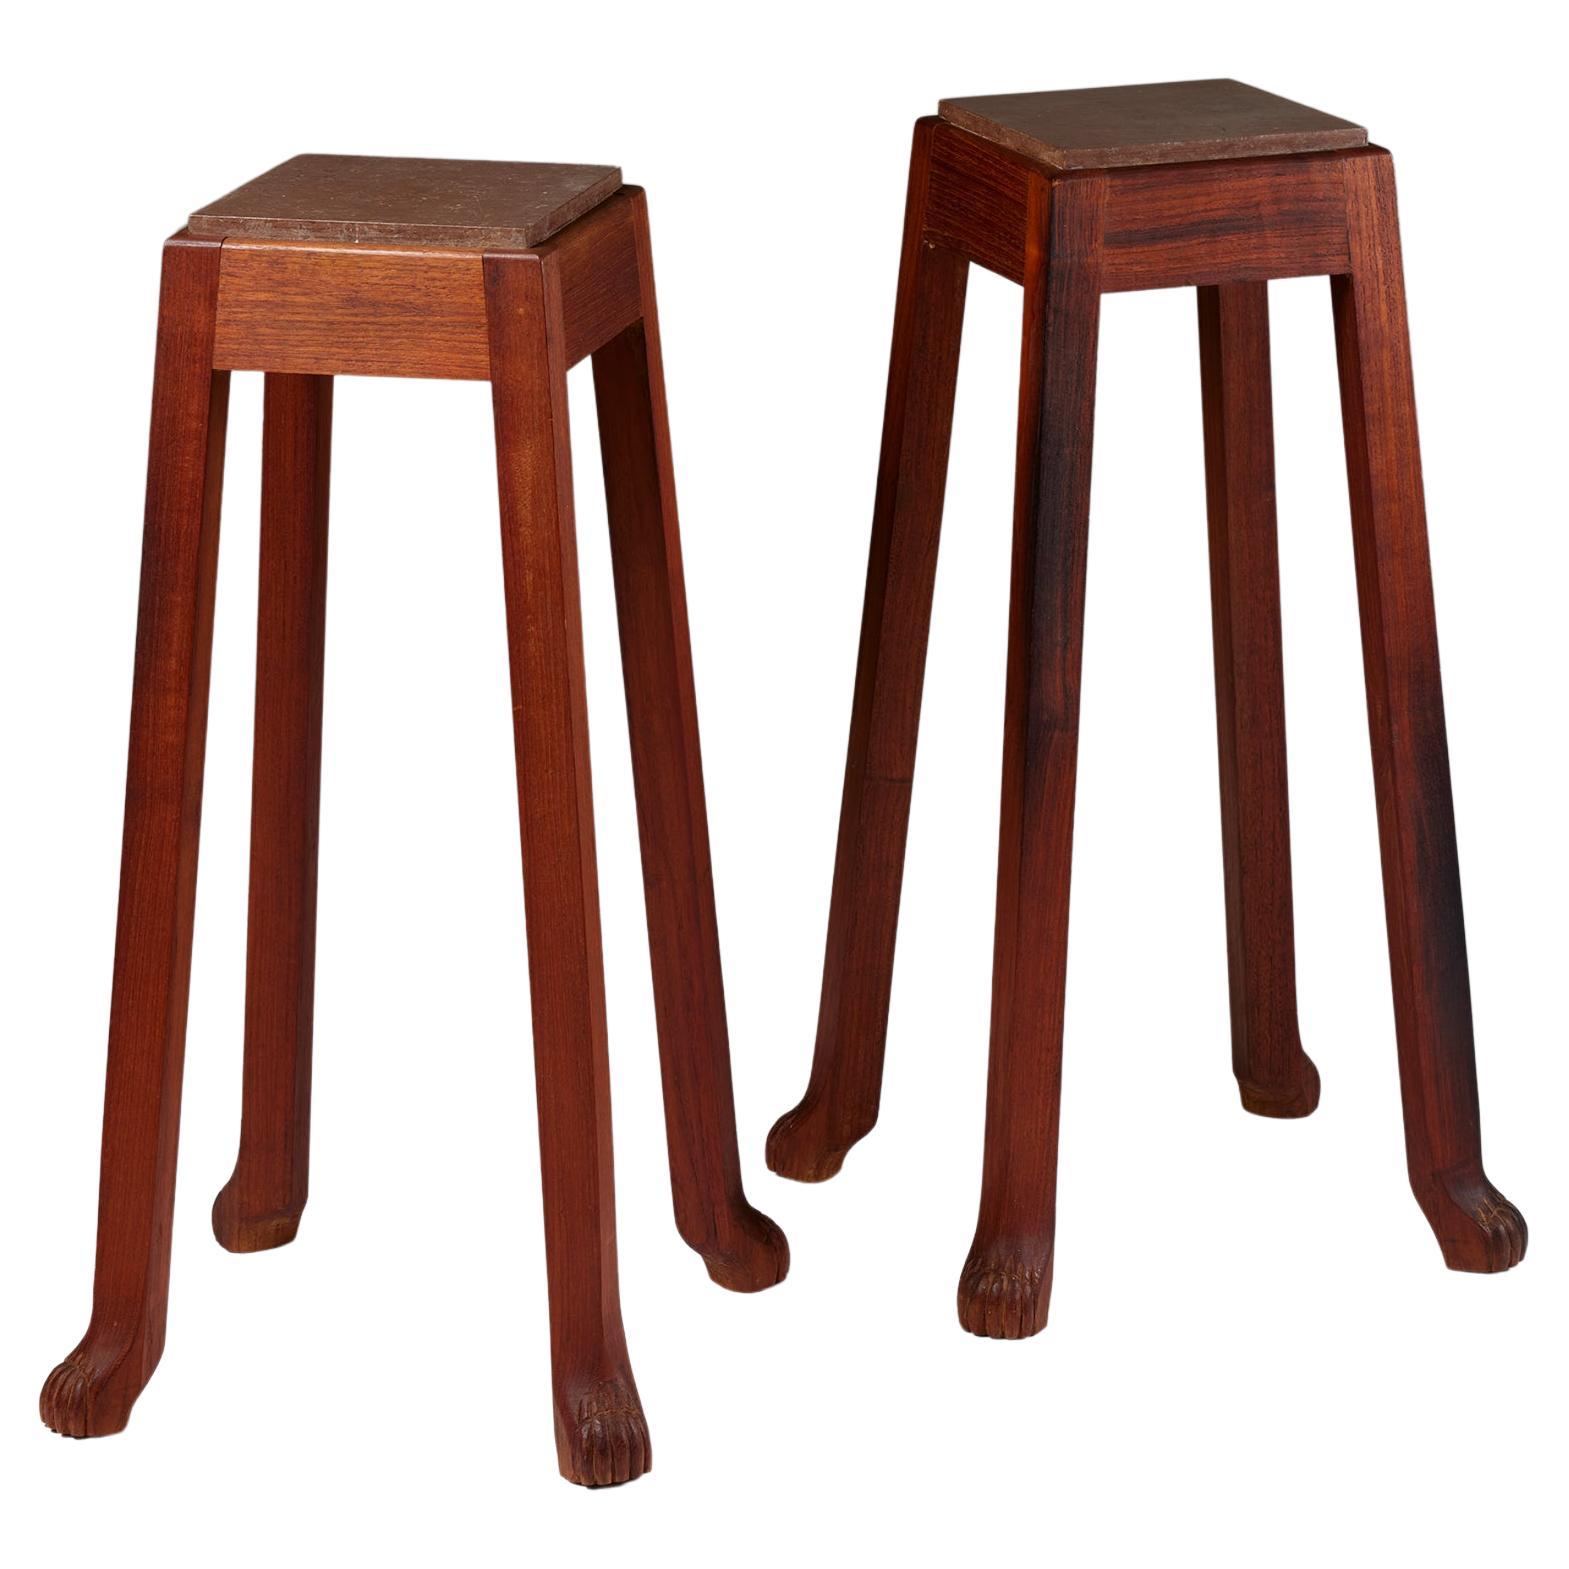 Pair of teak and limestone pedestals for Carl Malmsten’s School, Sweden, 1970s For Sale